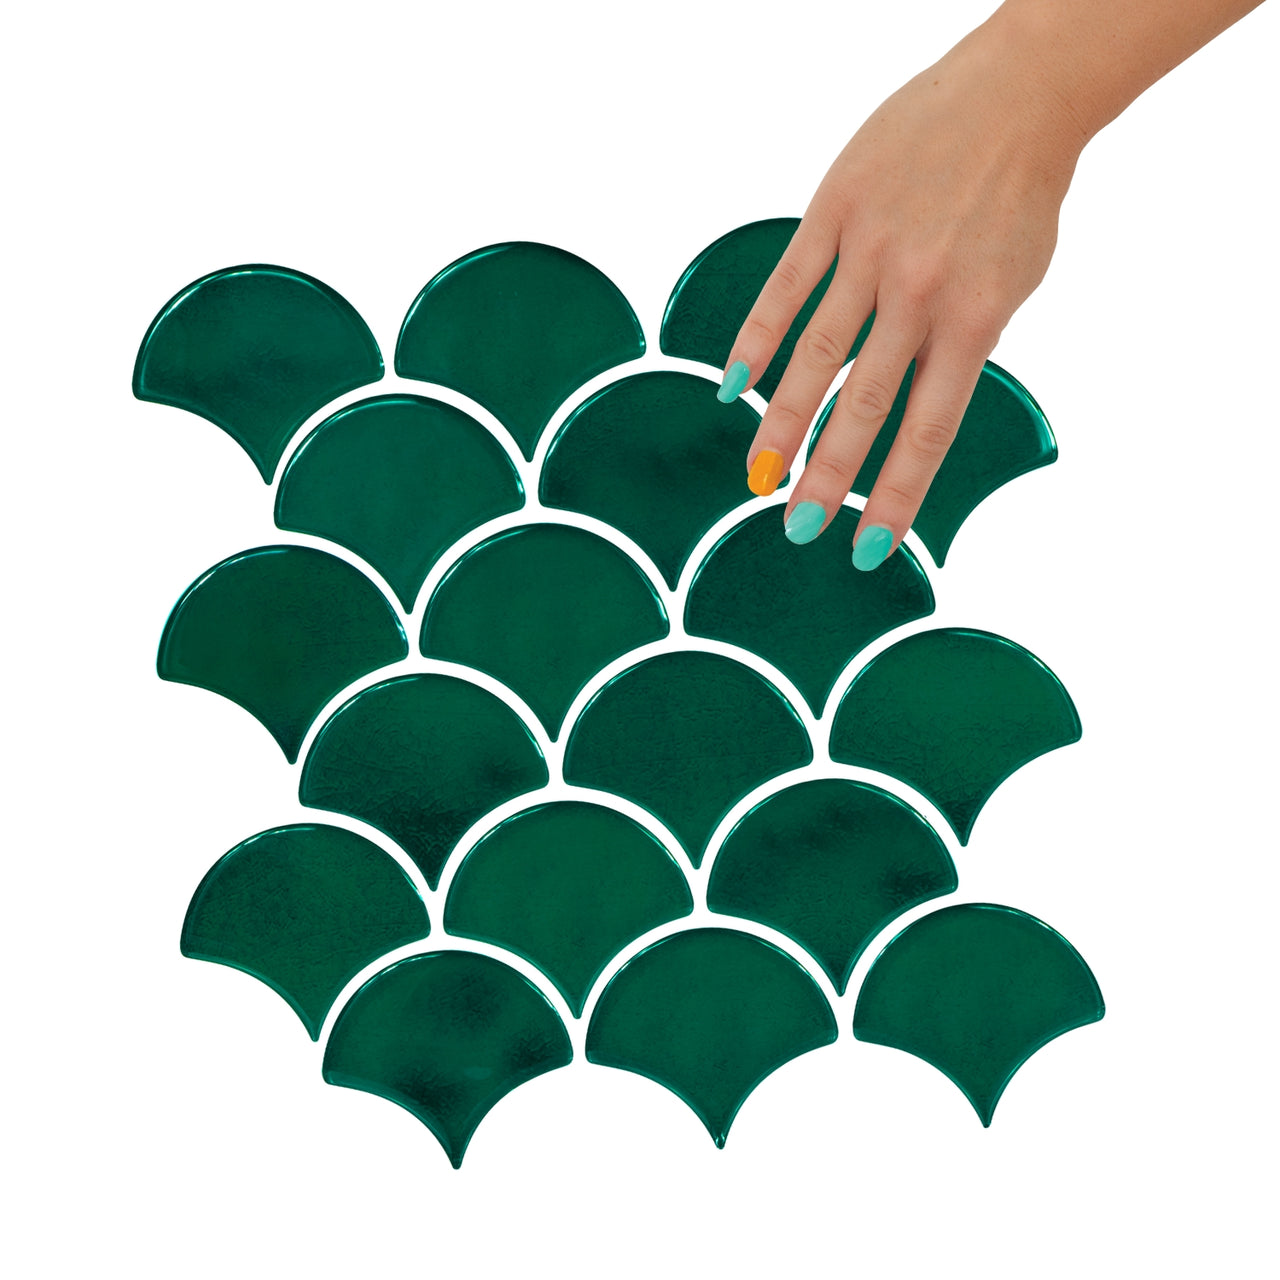 Scalloped Fish Scale Wall Tile | Green with White Grout